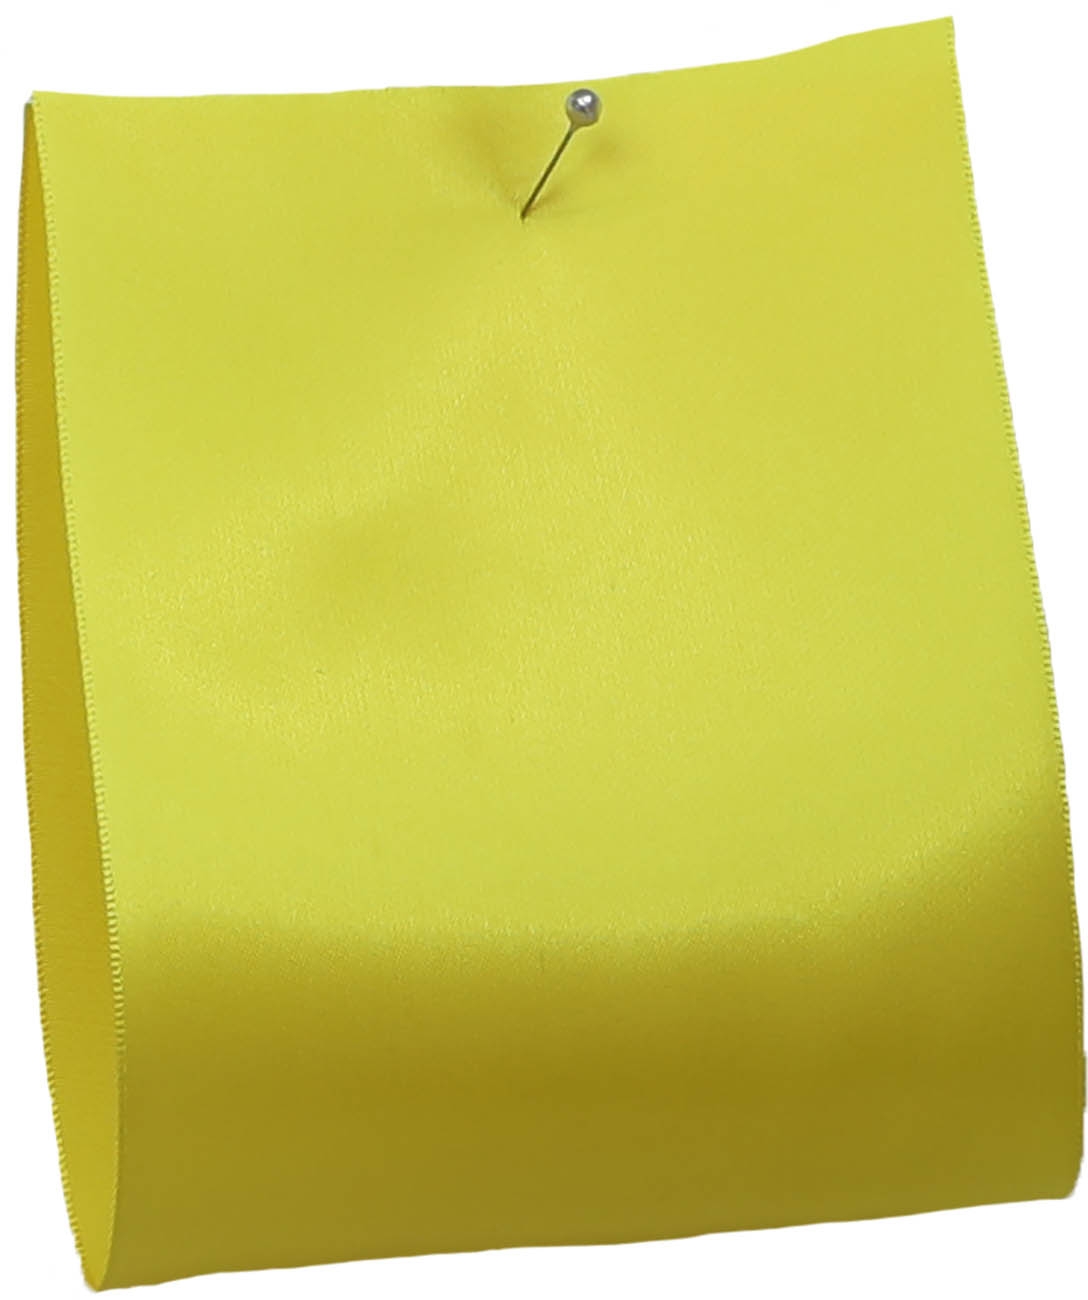 100mm wide satin ribbon in yellow